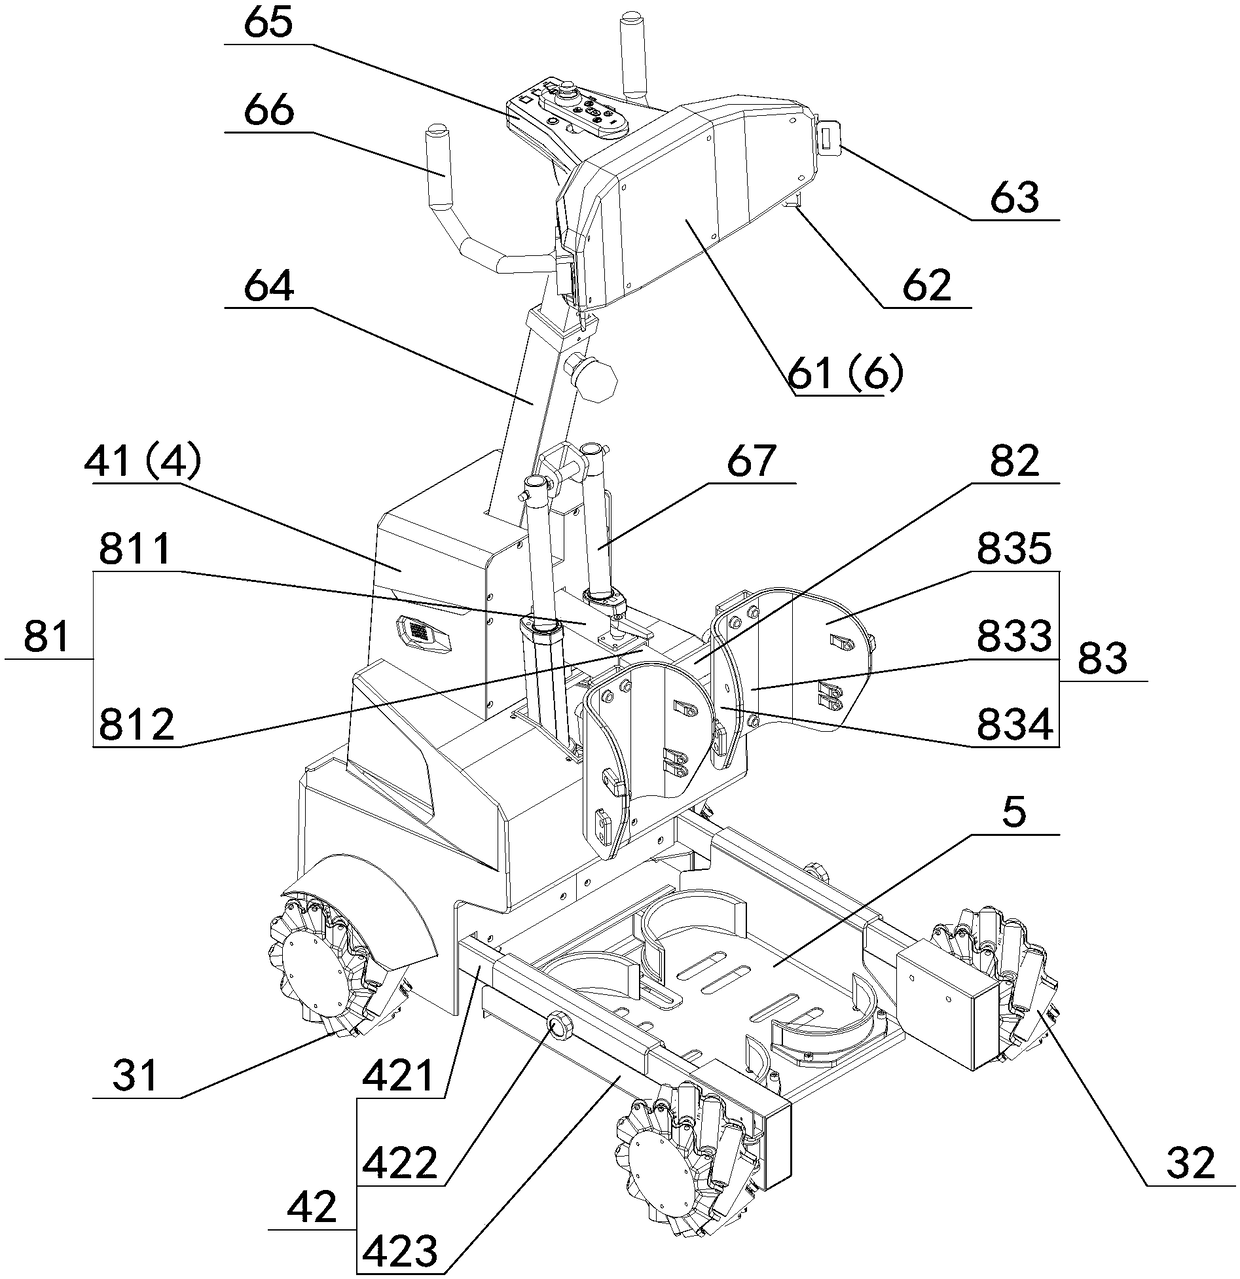 Assist robot without fixed seat and control method thereof